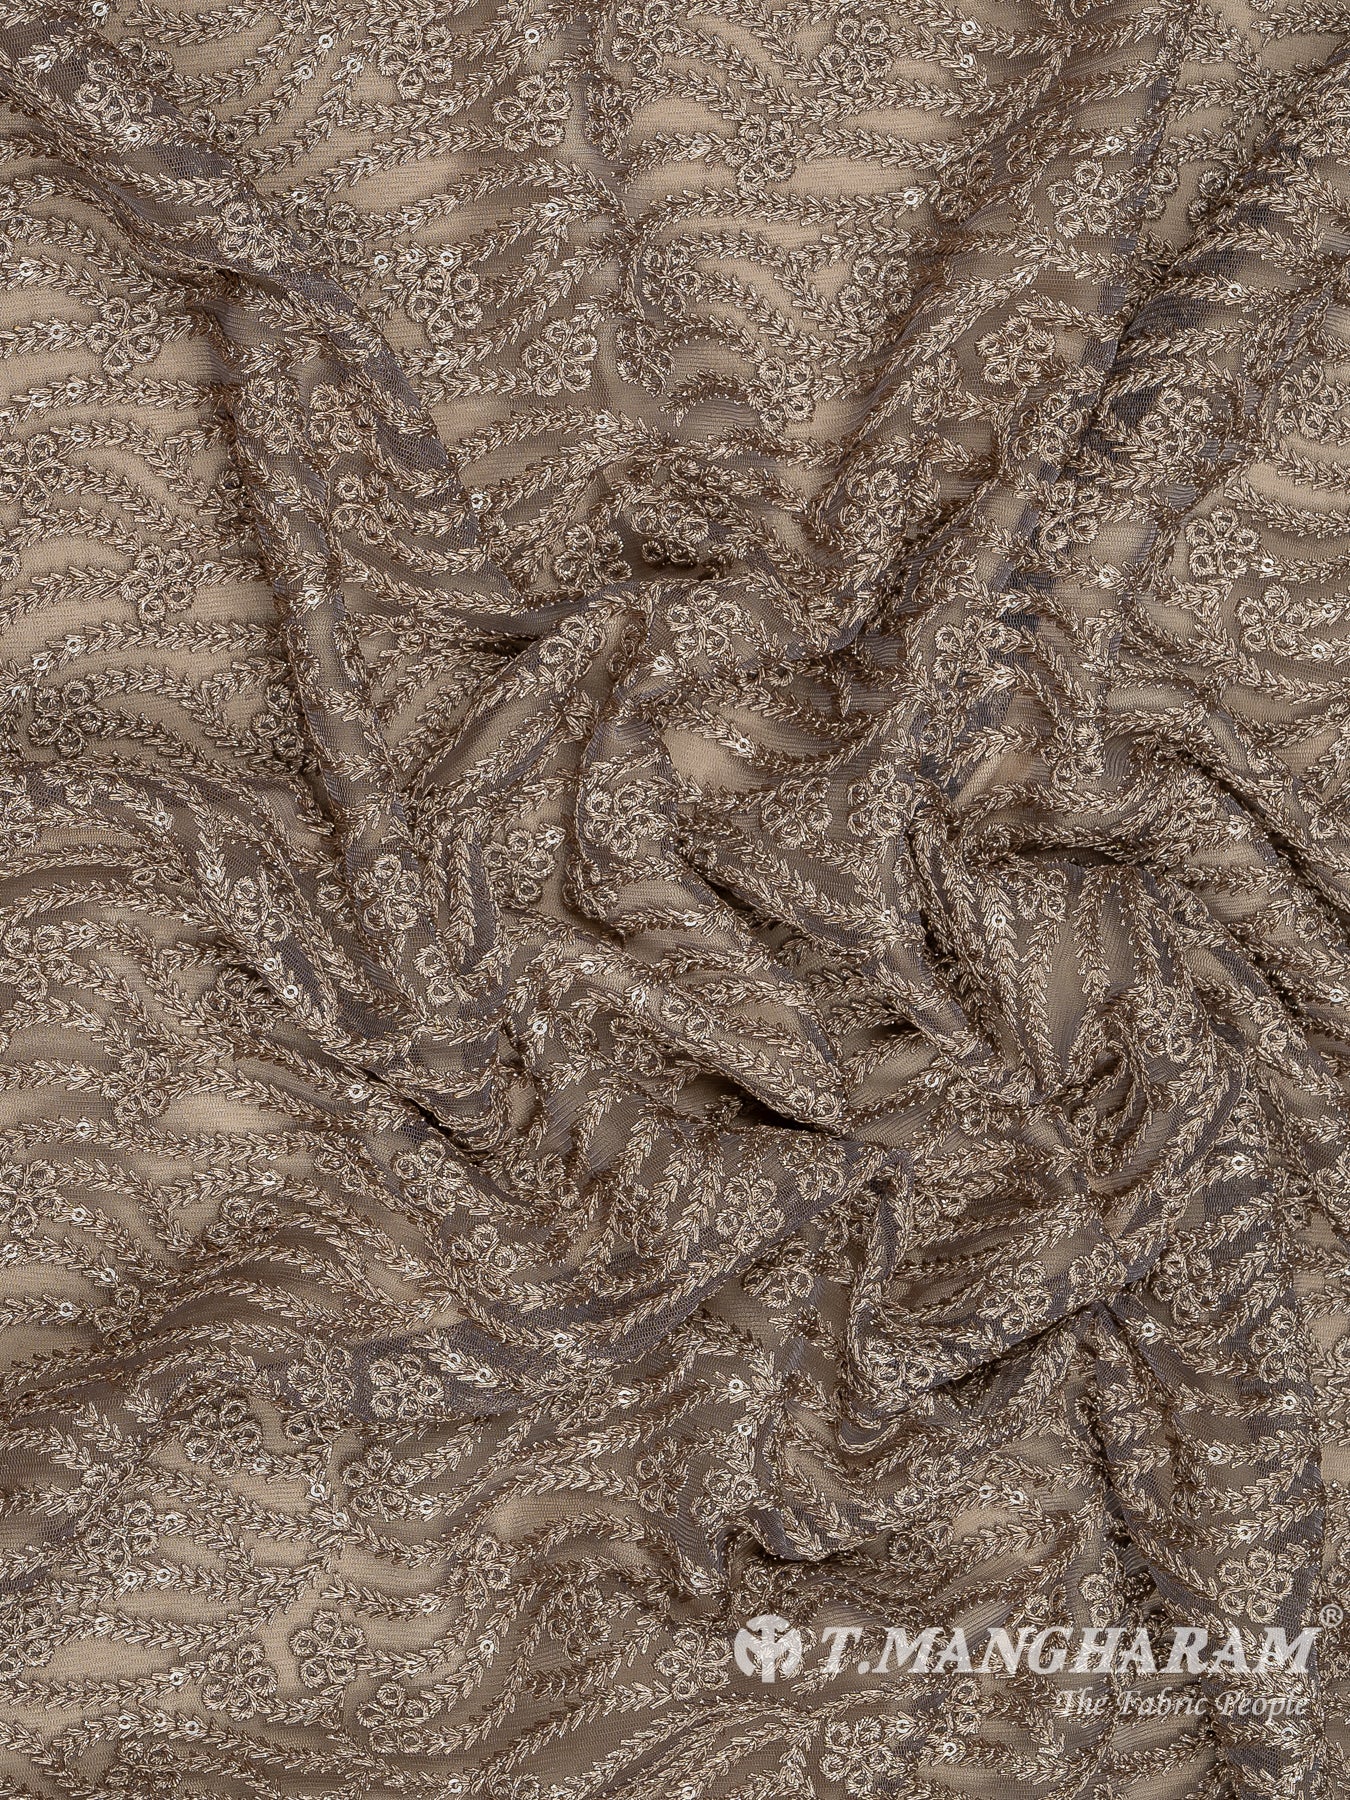 Beige Net Embroidery Fabric - EC8429 view-4